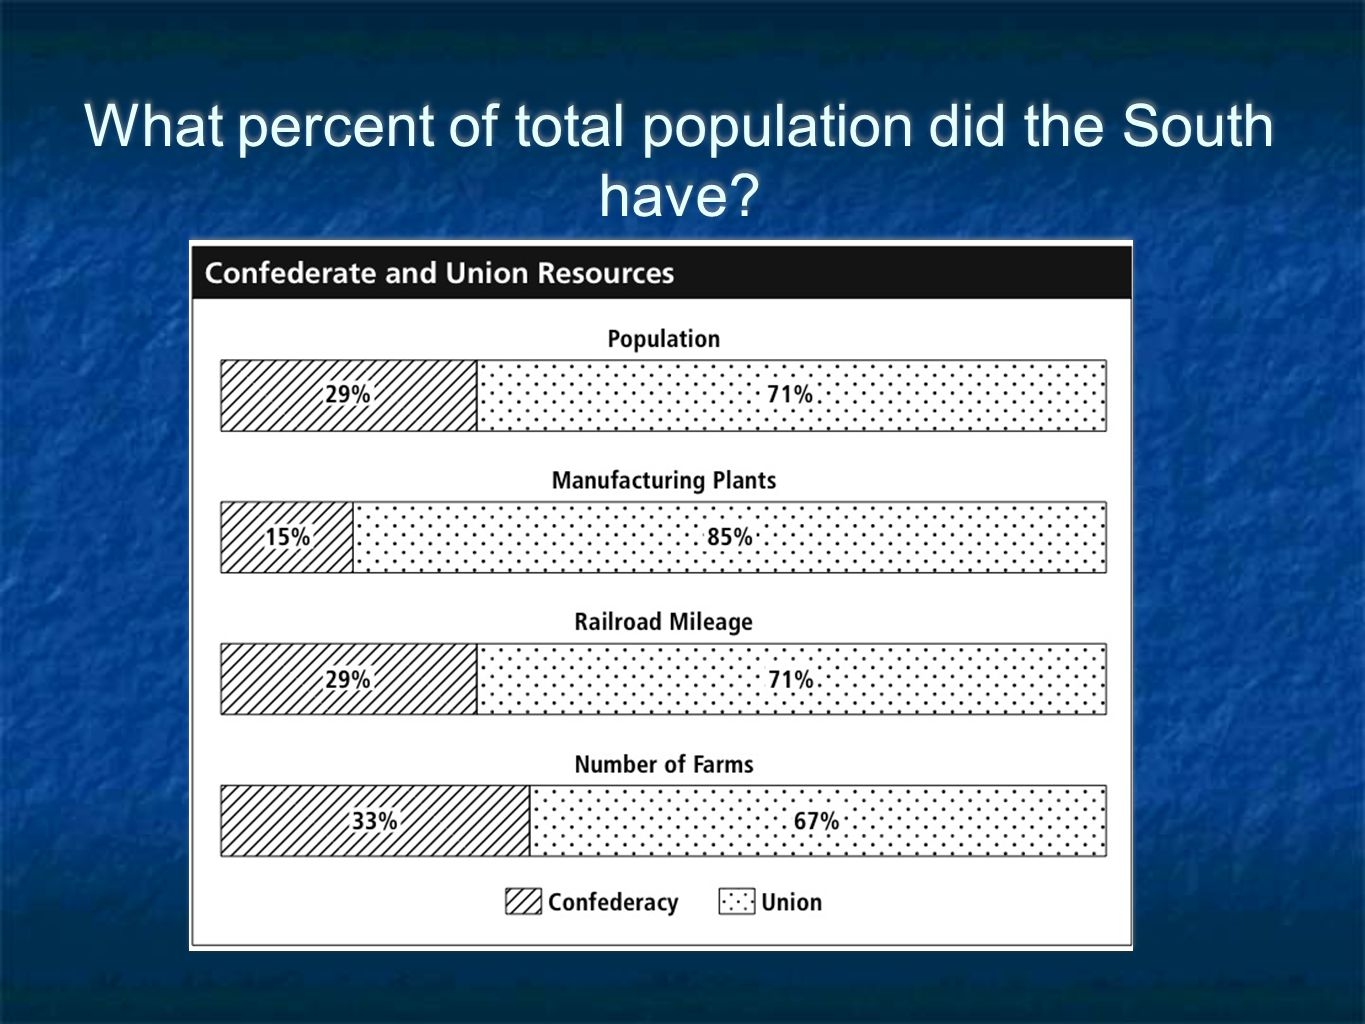 What percent of total population did the South have